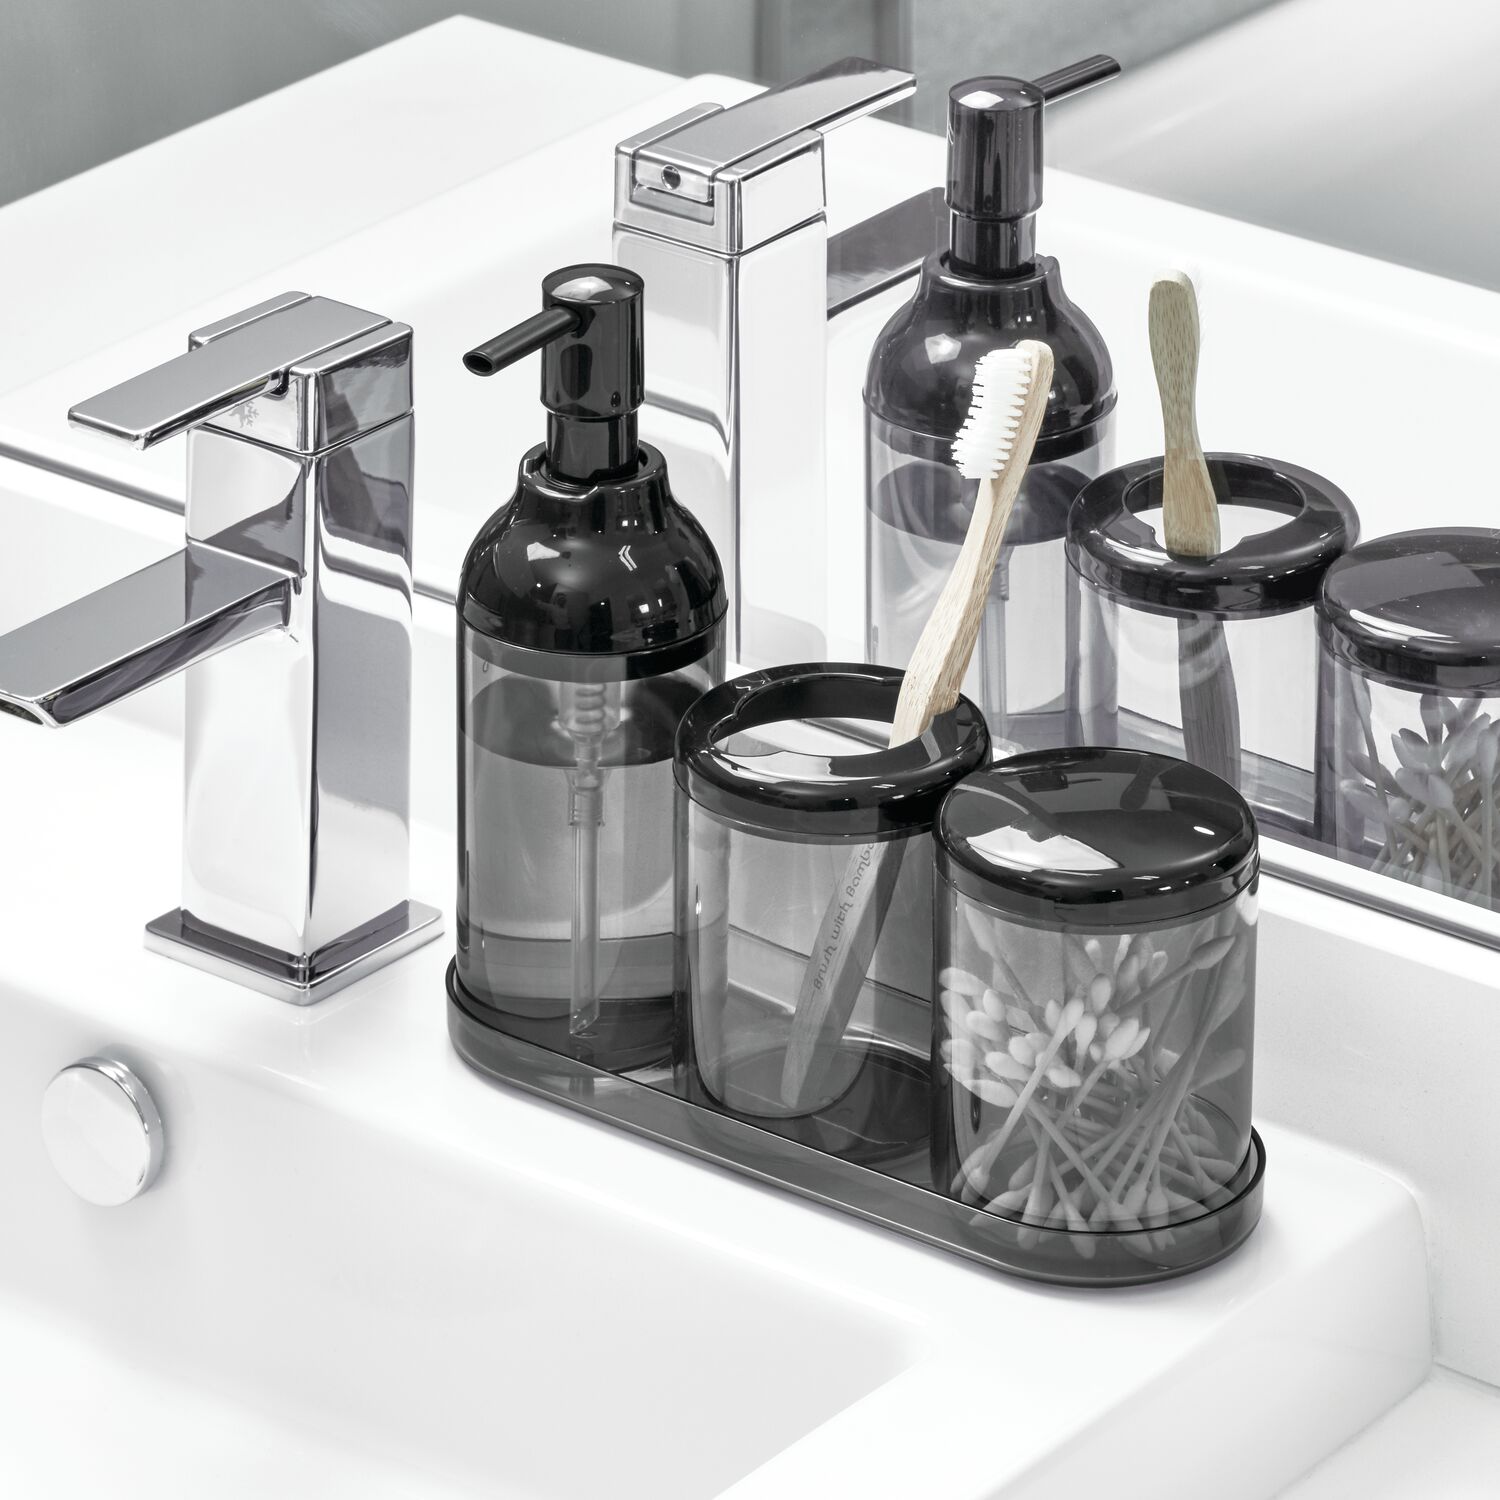 iDesign 4 Piece Clear Bath Accessories Sets, Black - image 3 of 6